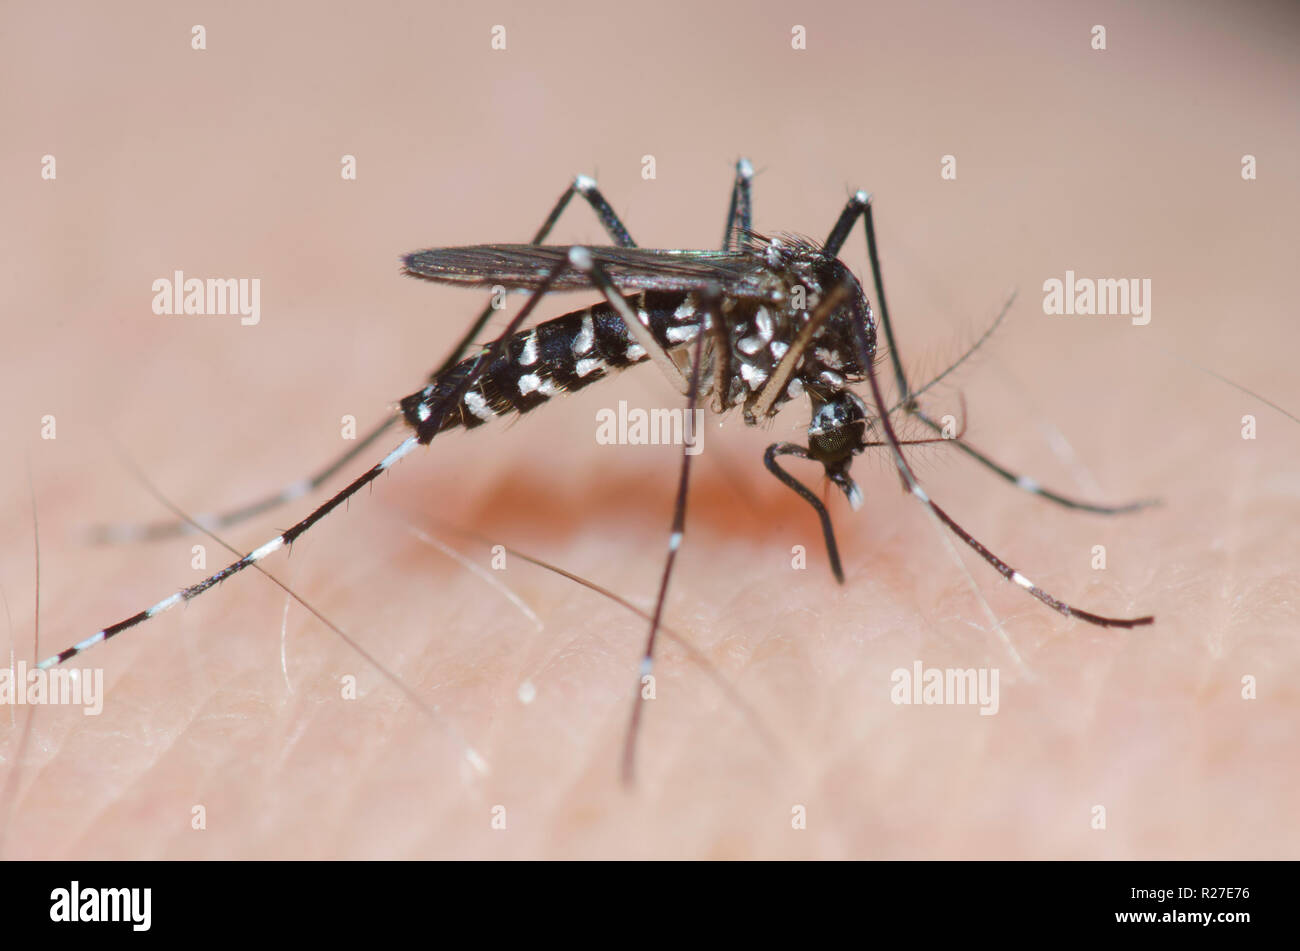 Asian Tiger Mosquito, Aedes albopictus, biting human skin and engorging in blood Stock Photo